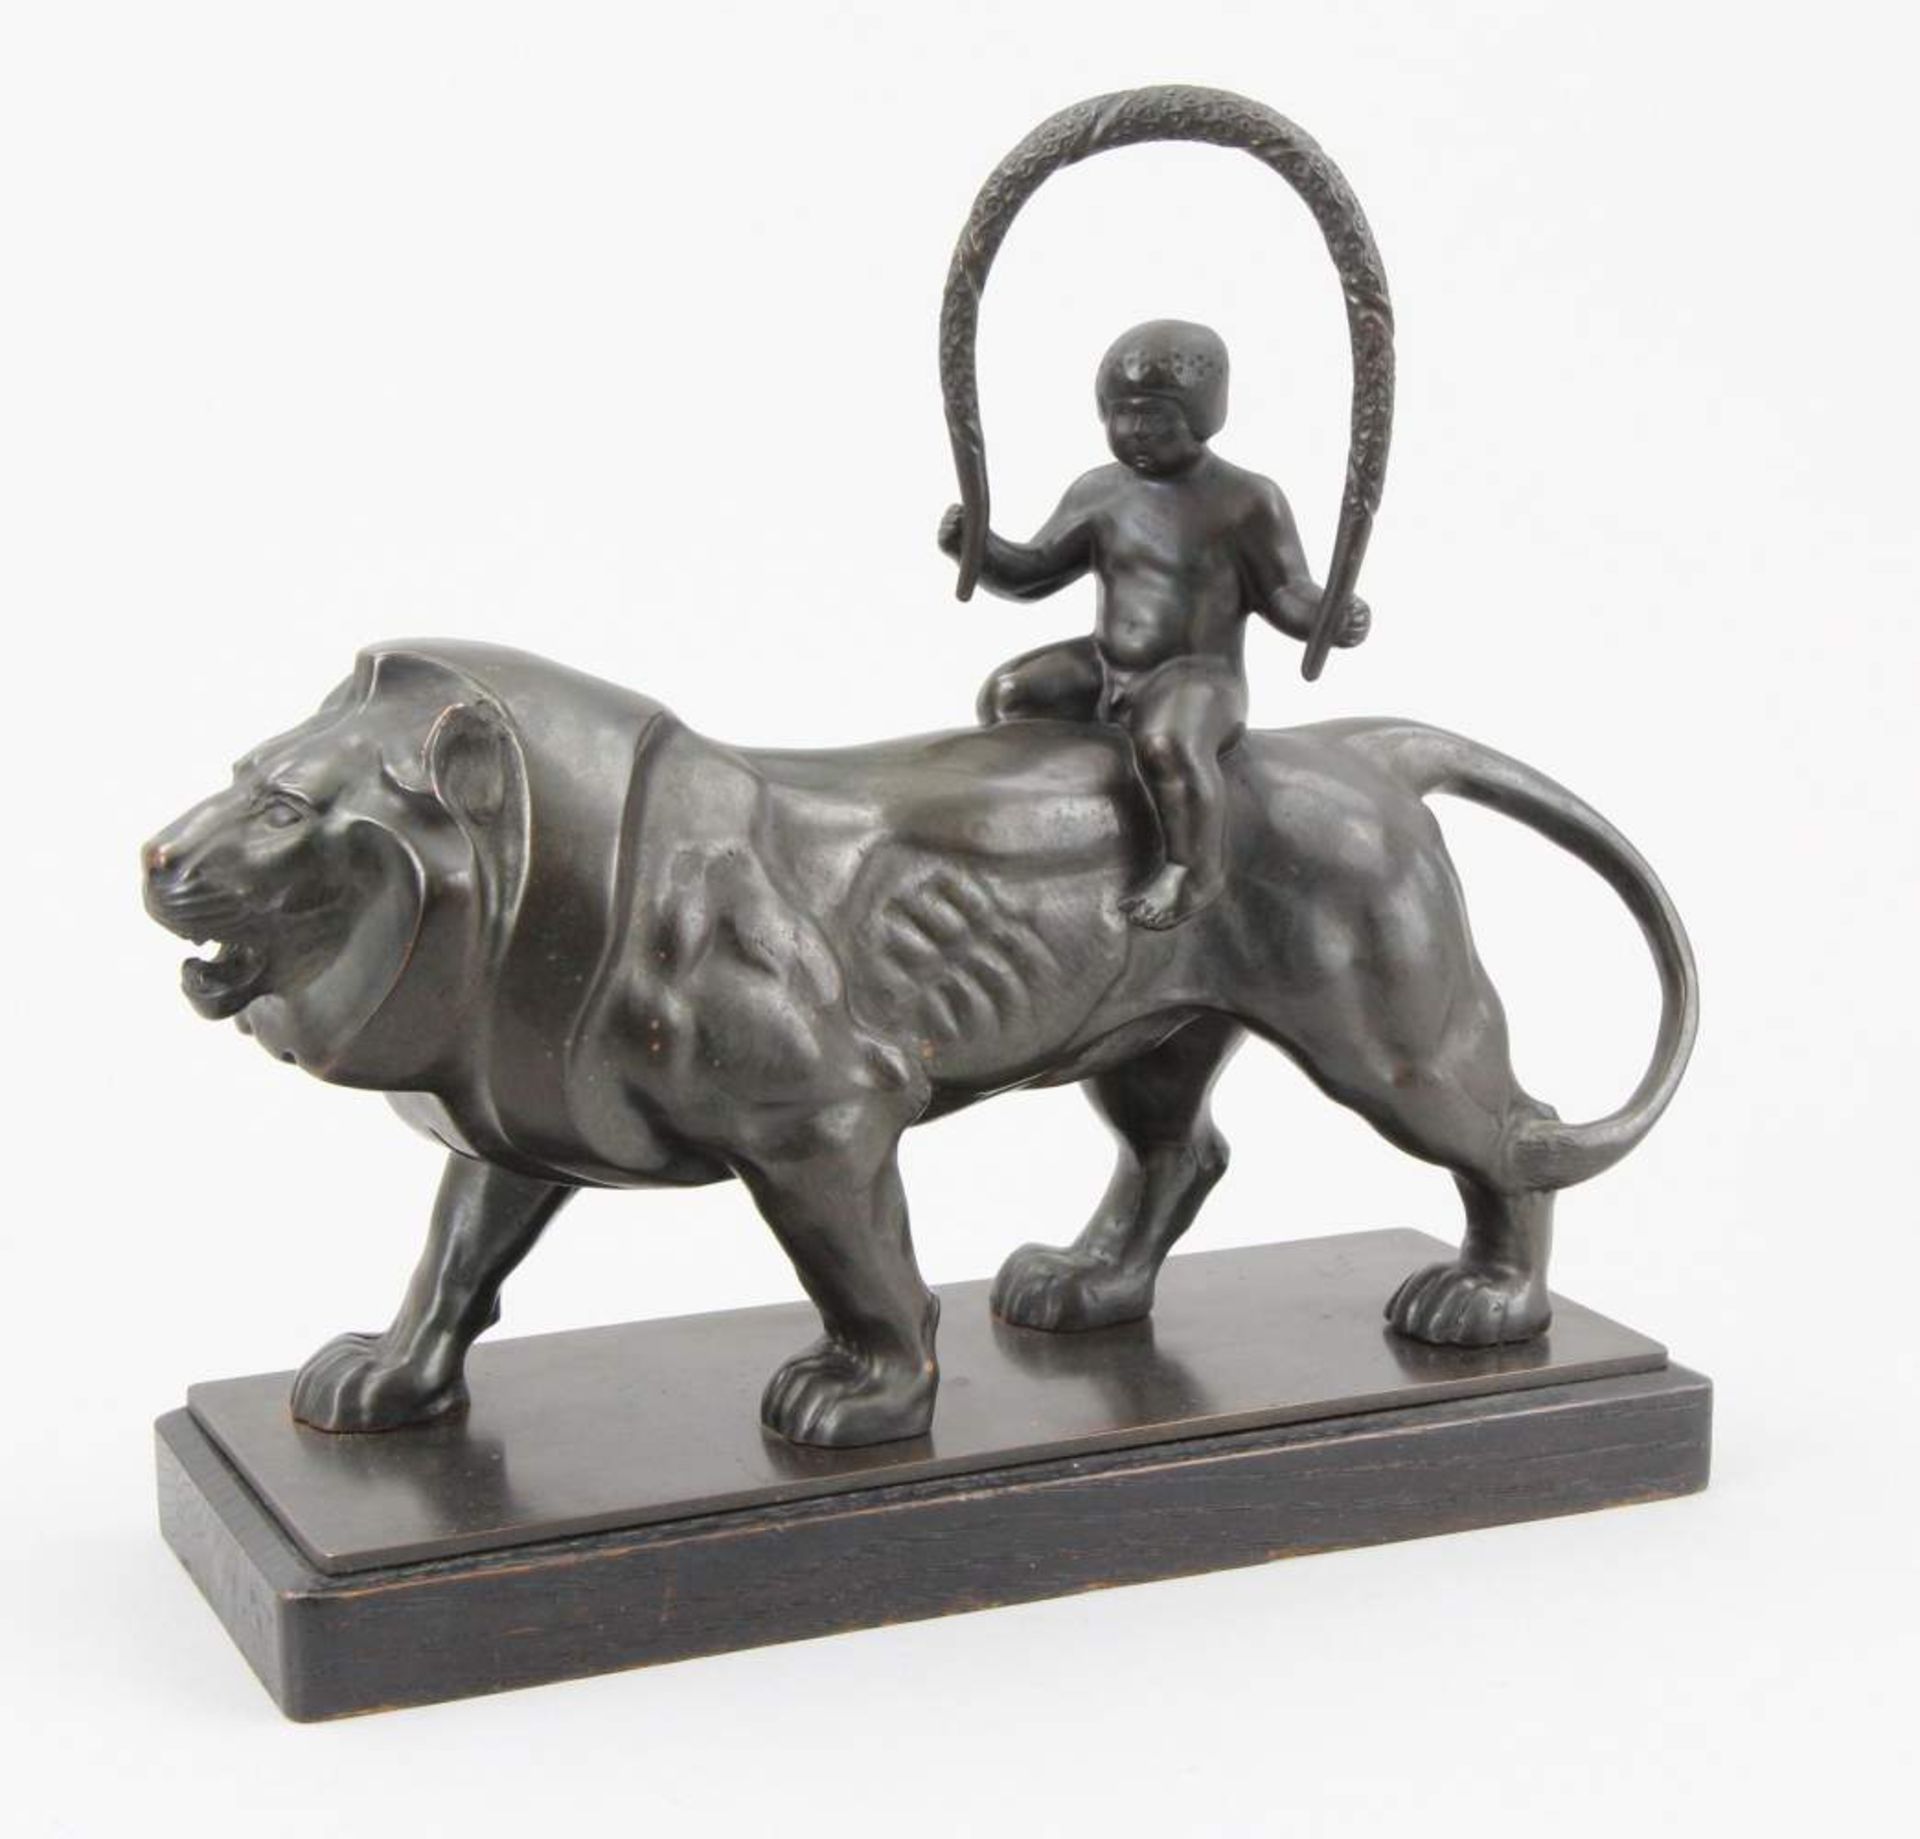 Germn early 20th century sculptor Figure, patinated bronze, naked boy riding a lion, original wooden - Image 2 of 3